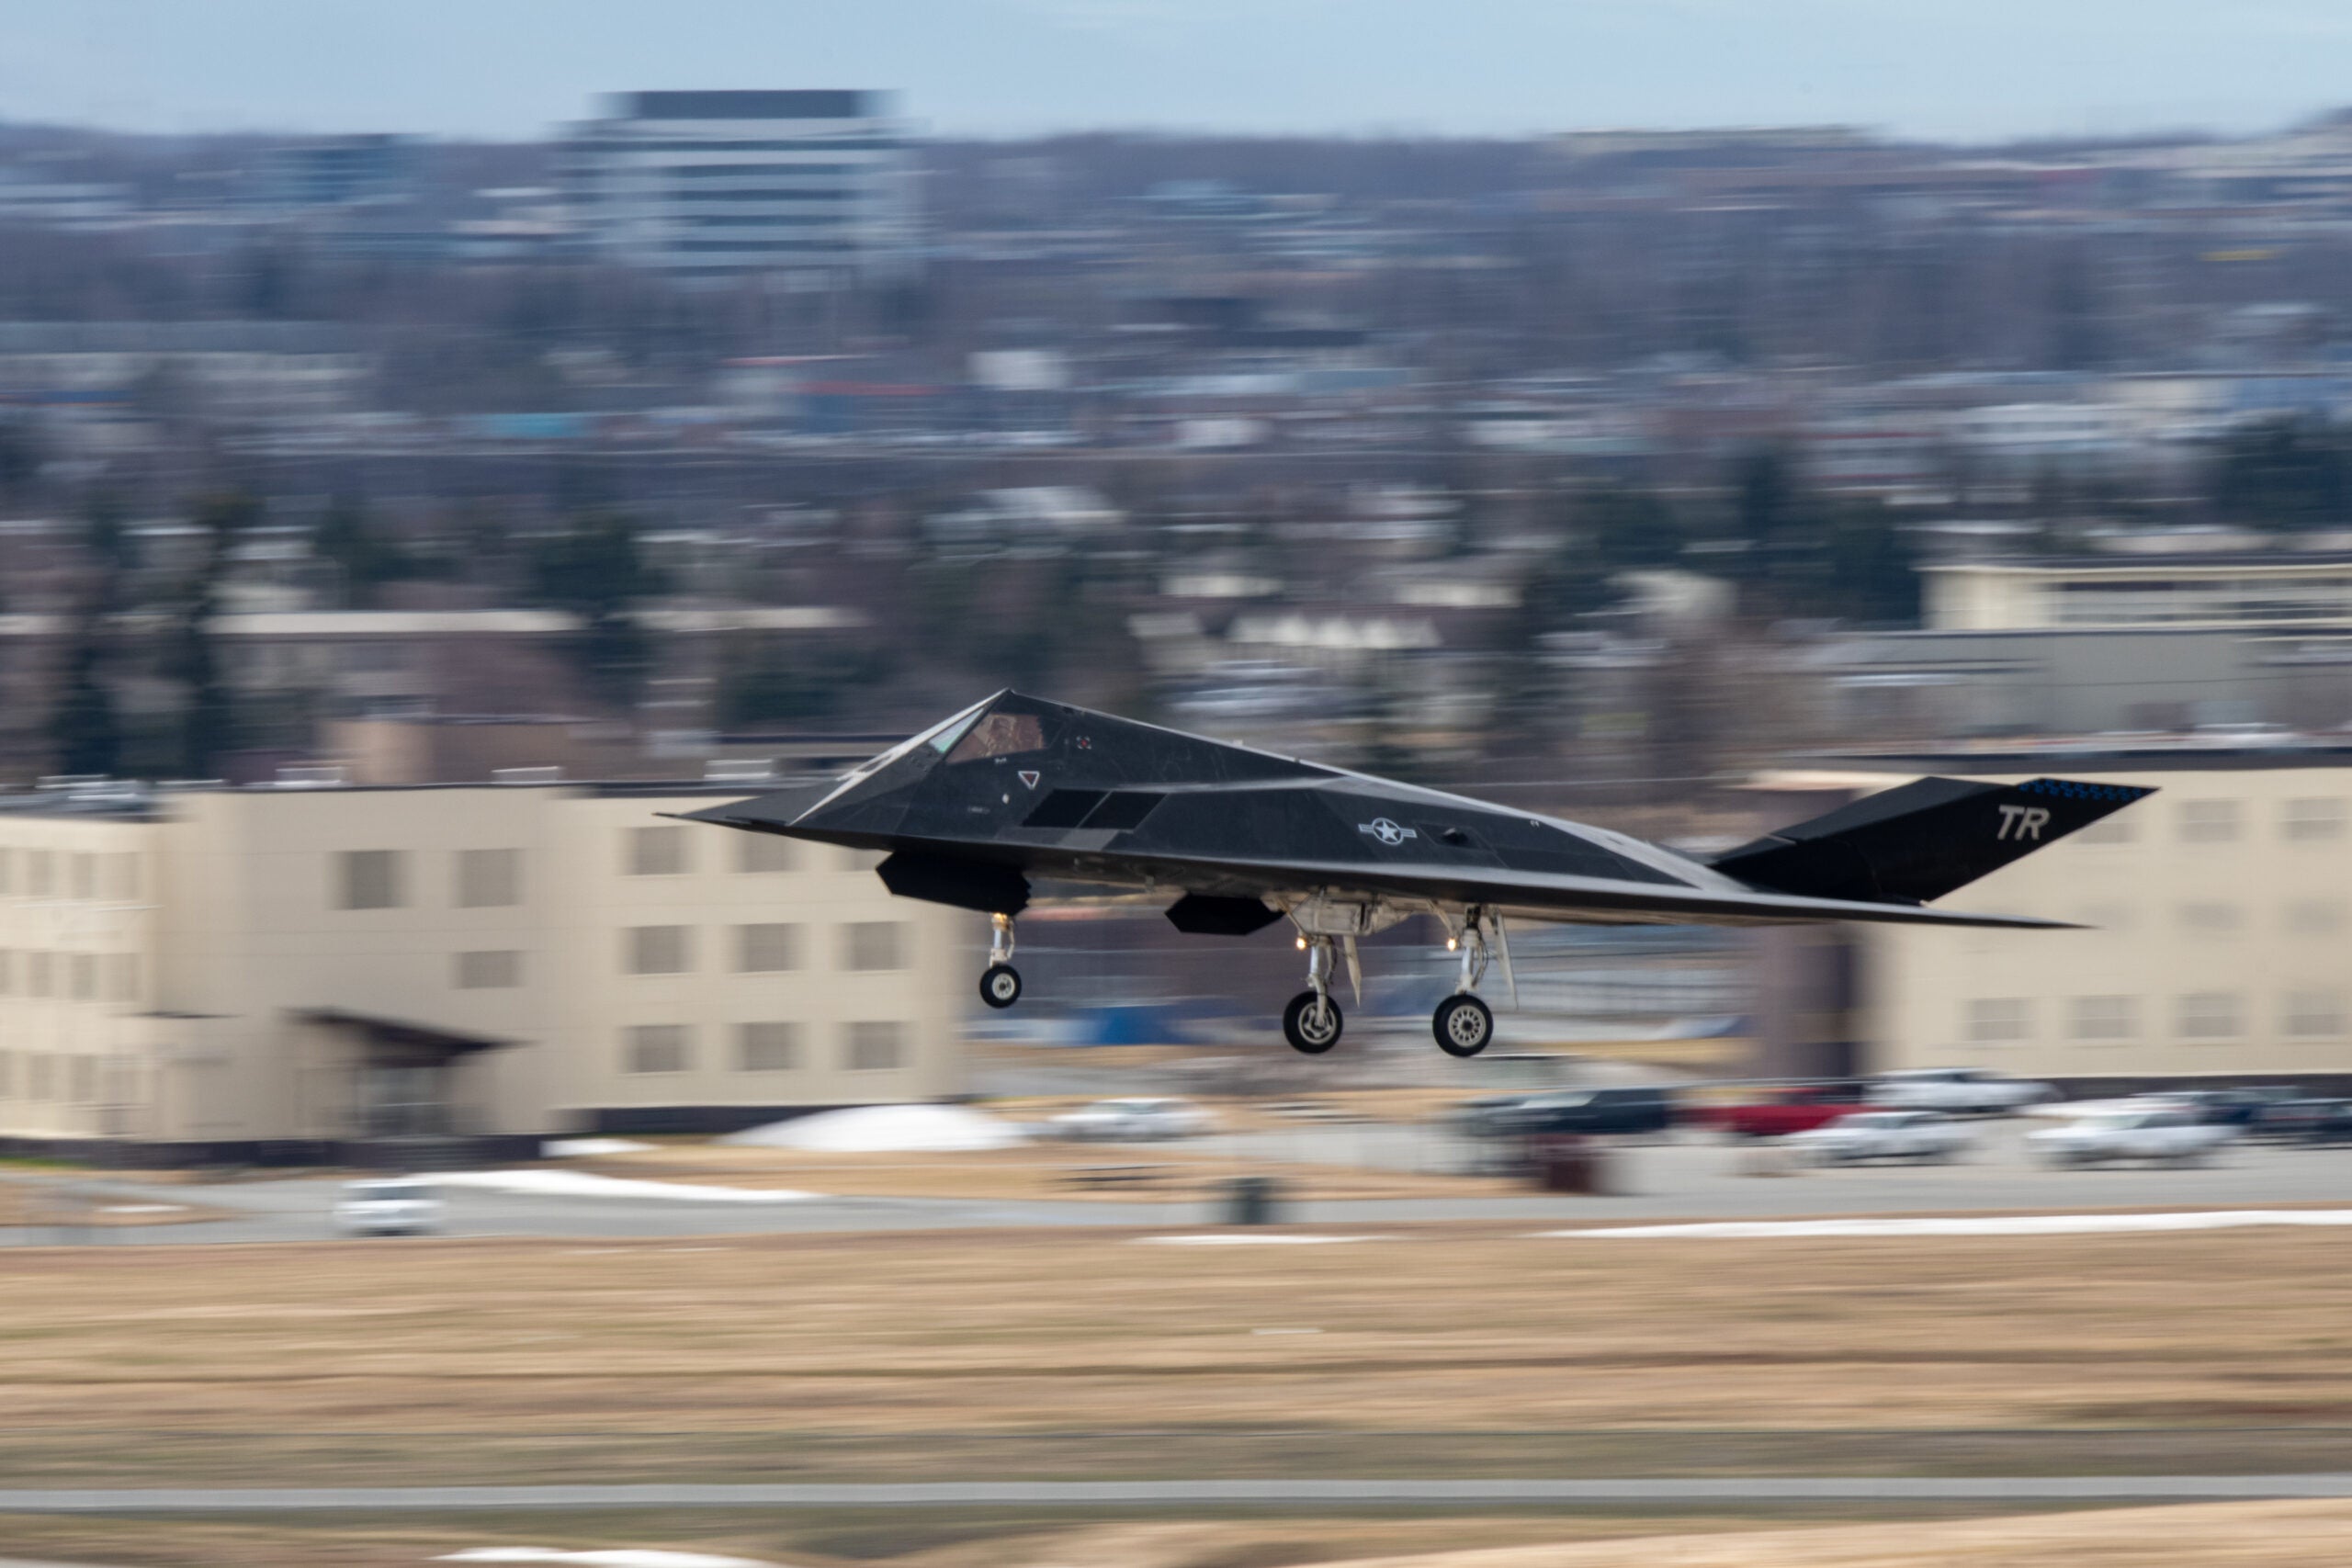 A U.S. Air Force F-117 Nighthawk prepares to land during Northern Edge 23-1 at Joint Base Elmendorf-Richardson, Alaska, May 10, 2023. Northern Edge 23-1 provides an opportunity for joint, multinational and multi-domain operations designed to implement high-end, realistic war fighter training, develop and improve joint interoperability, and enhance the combat readiness of participating forces. (U.S. Air Force photo by Senior Airman Patrick Sullivan)